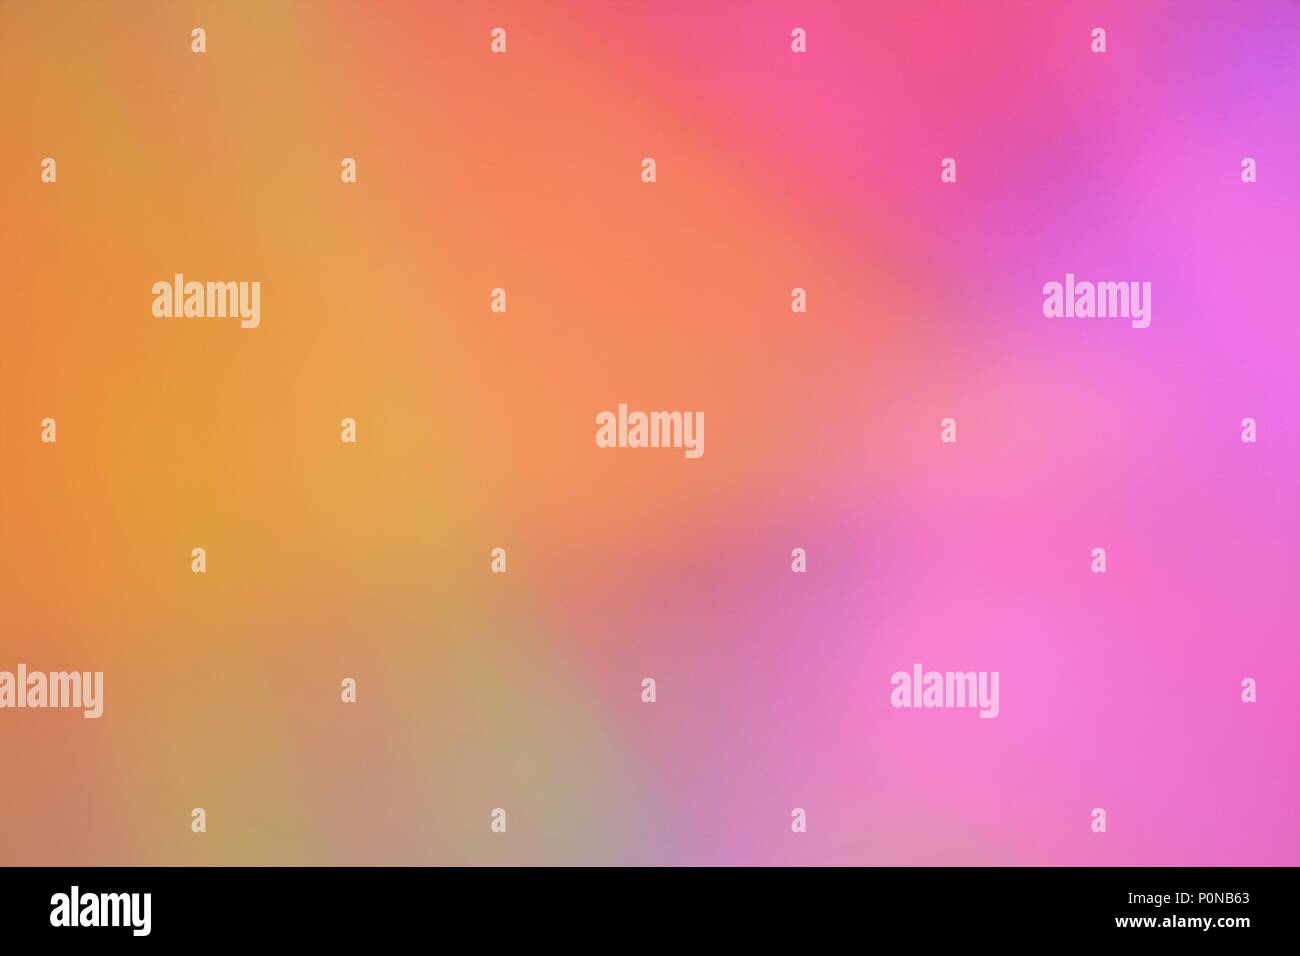 Abstract defocused purple and yellow color gradient background Stock Photo